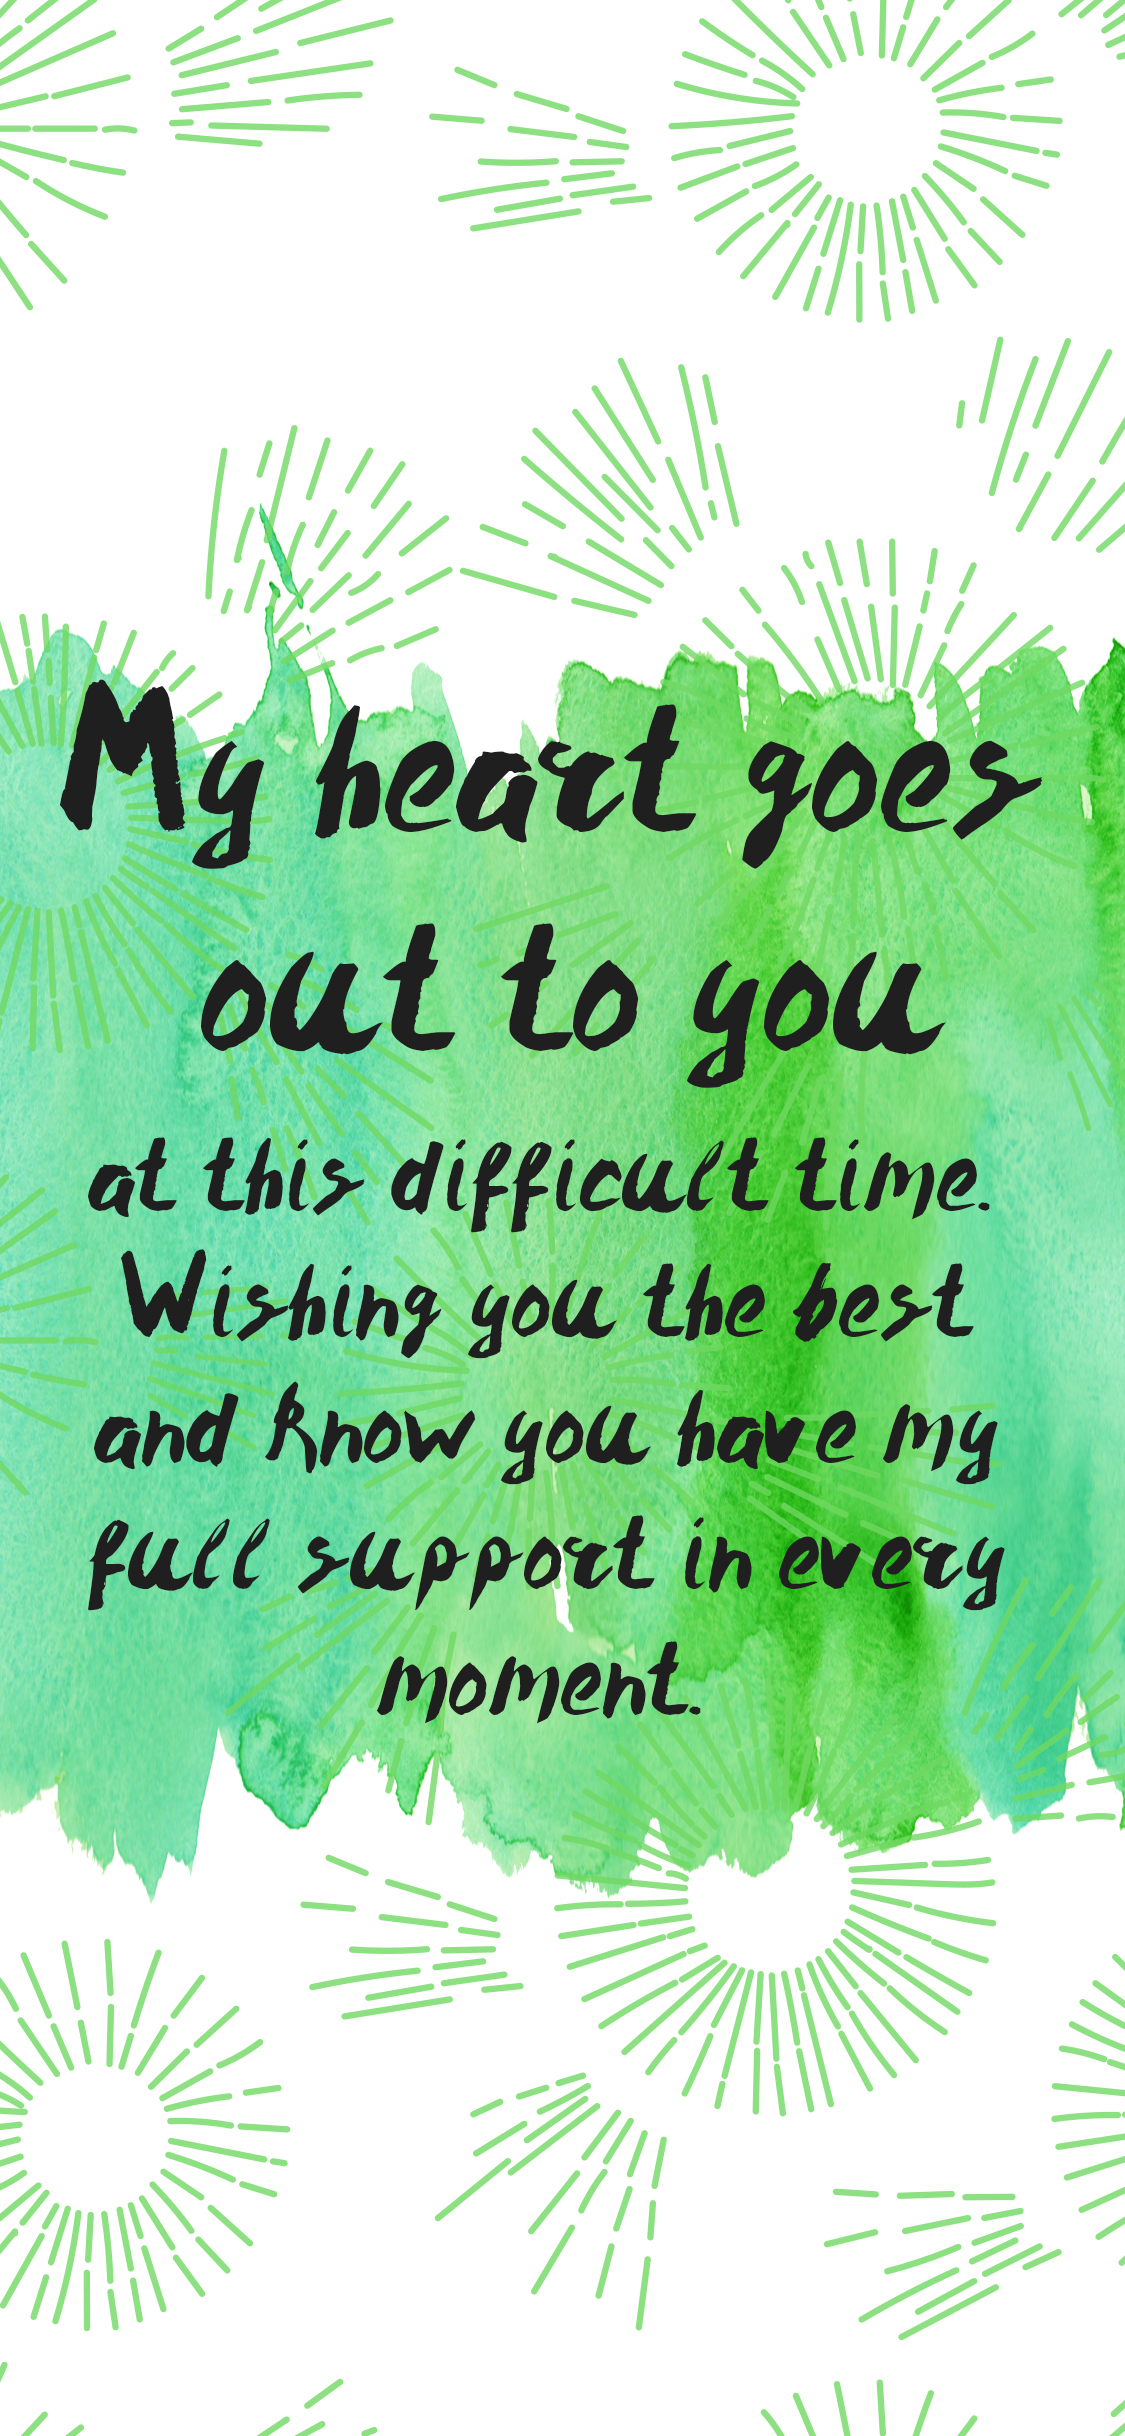 My heart goes out to you - sympathy card